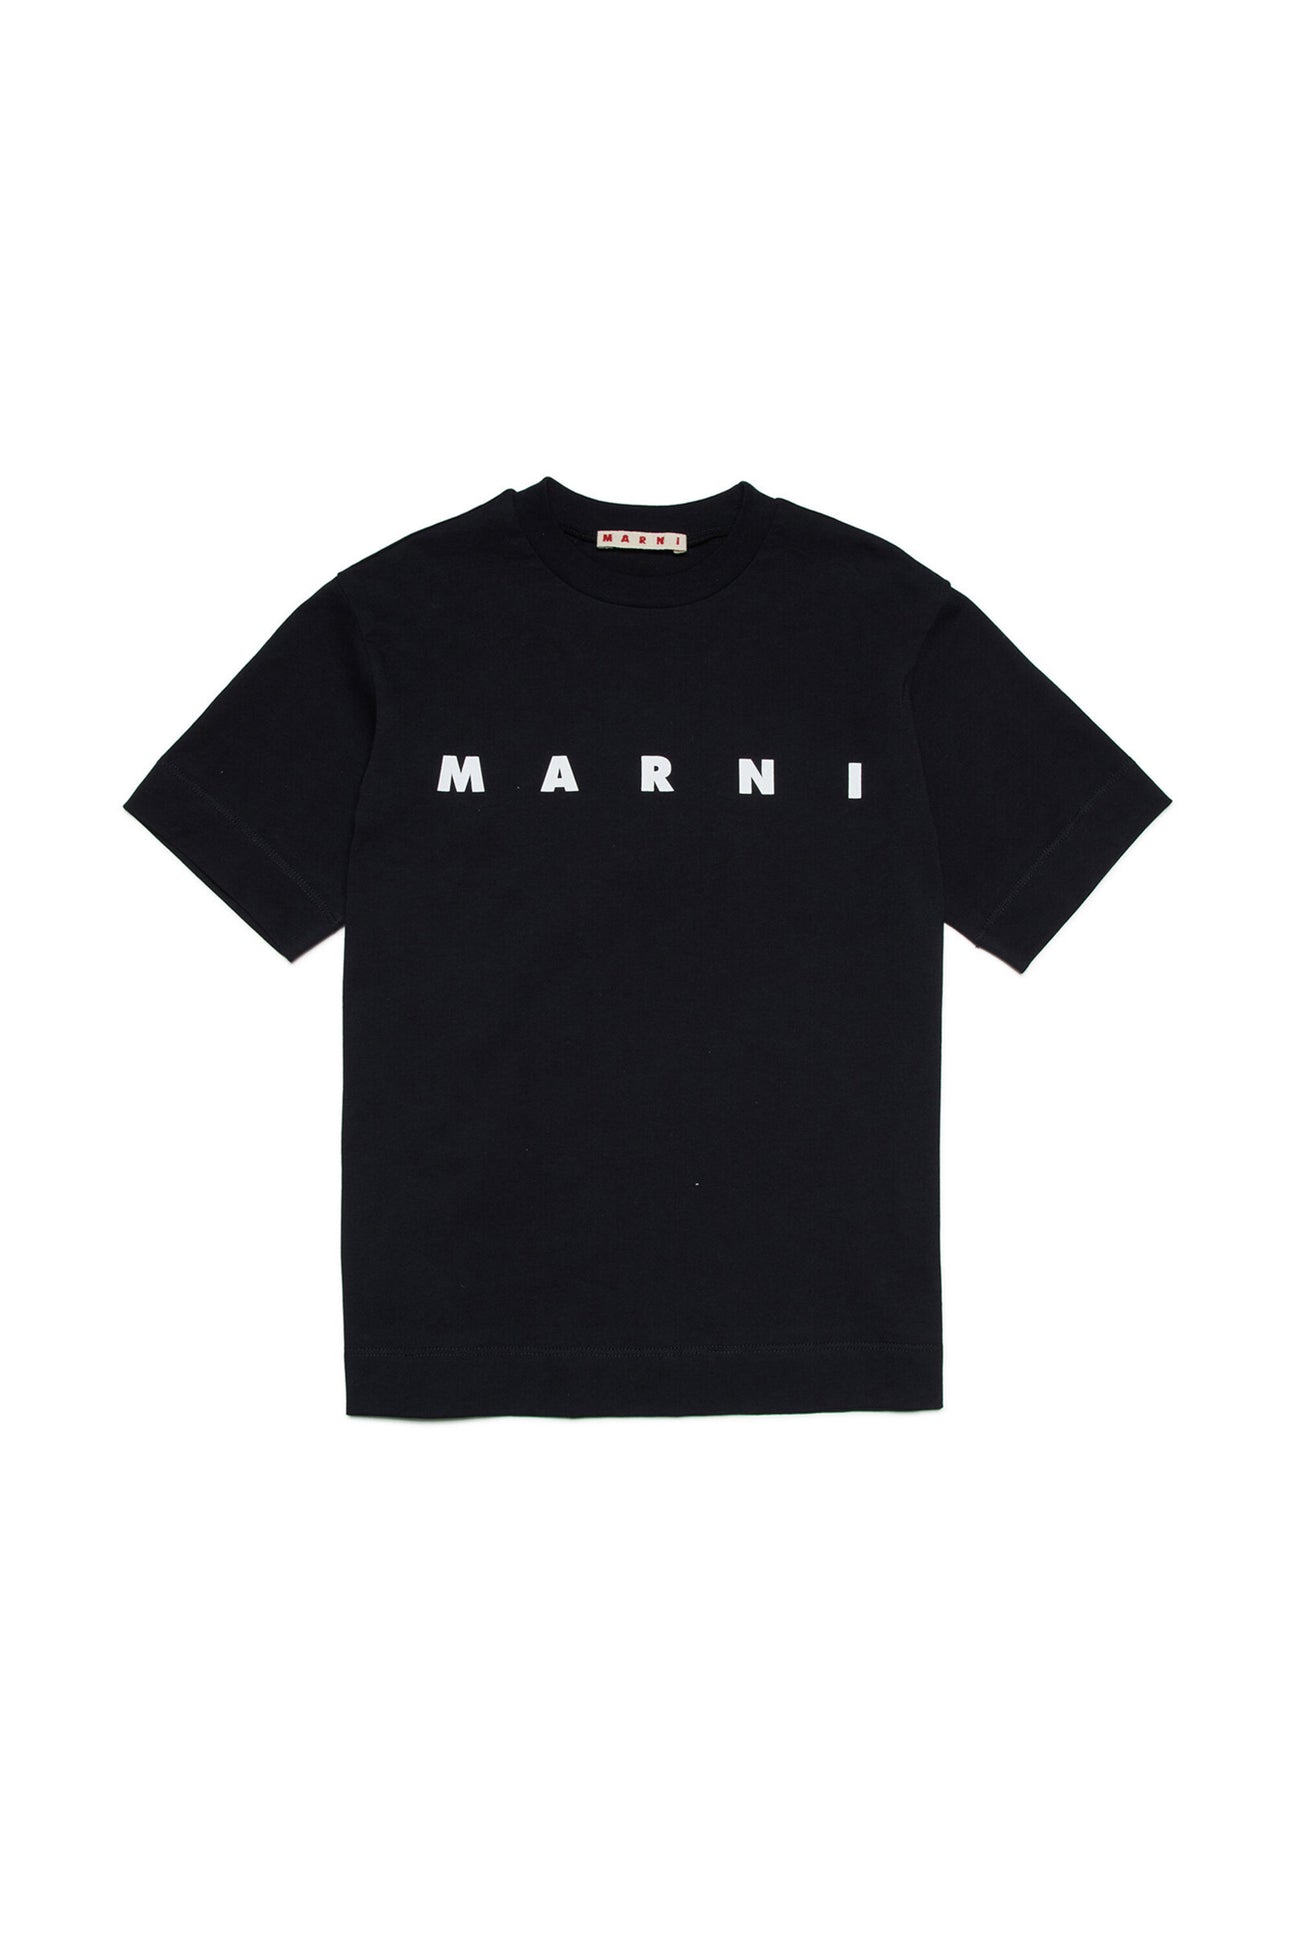 Black jersey t-shirt with logo 